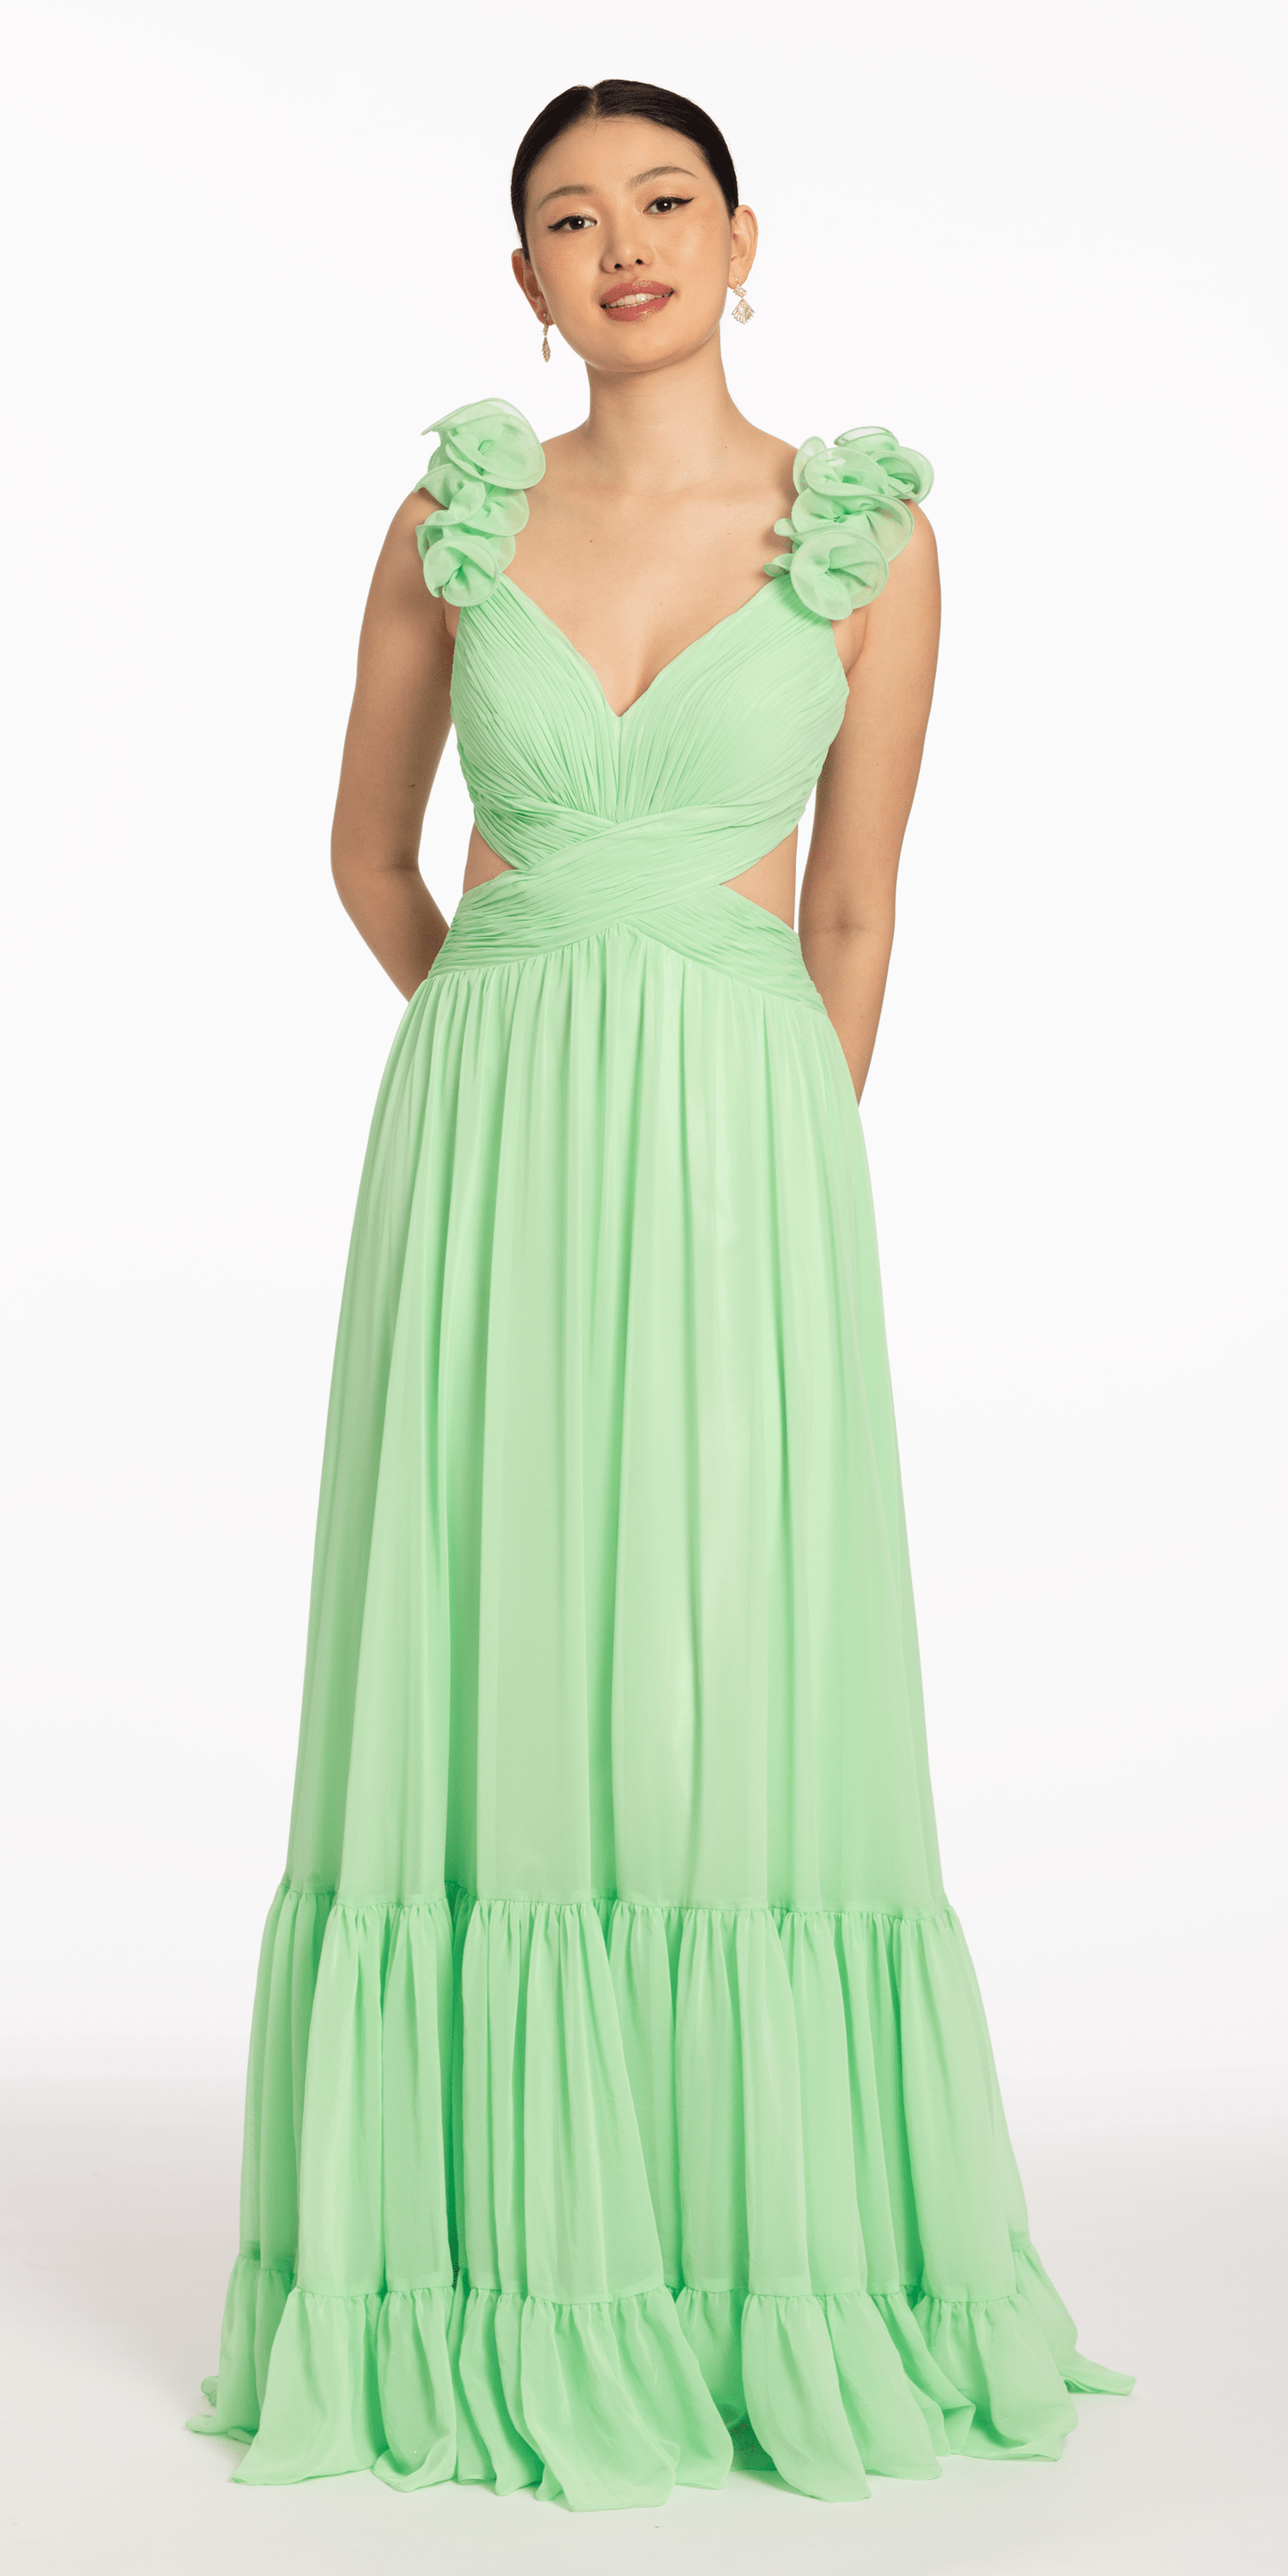 Camille La Vie Ruched Chiffon Front Dress with Shoulder Ruffles missy / 00 / lime